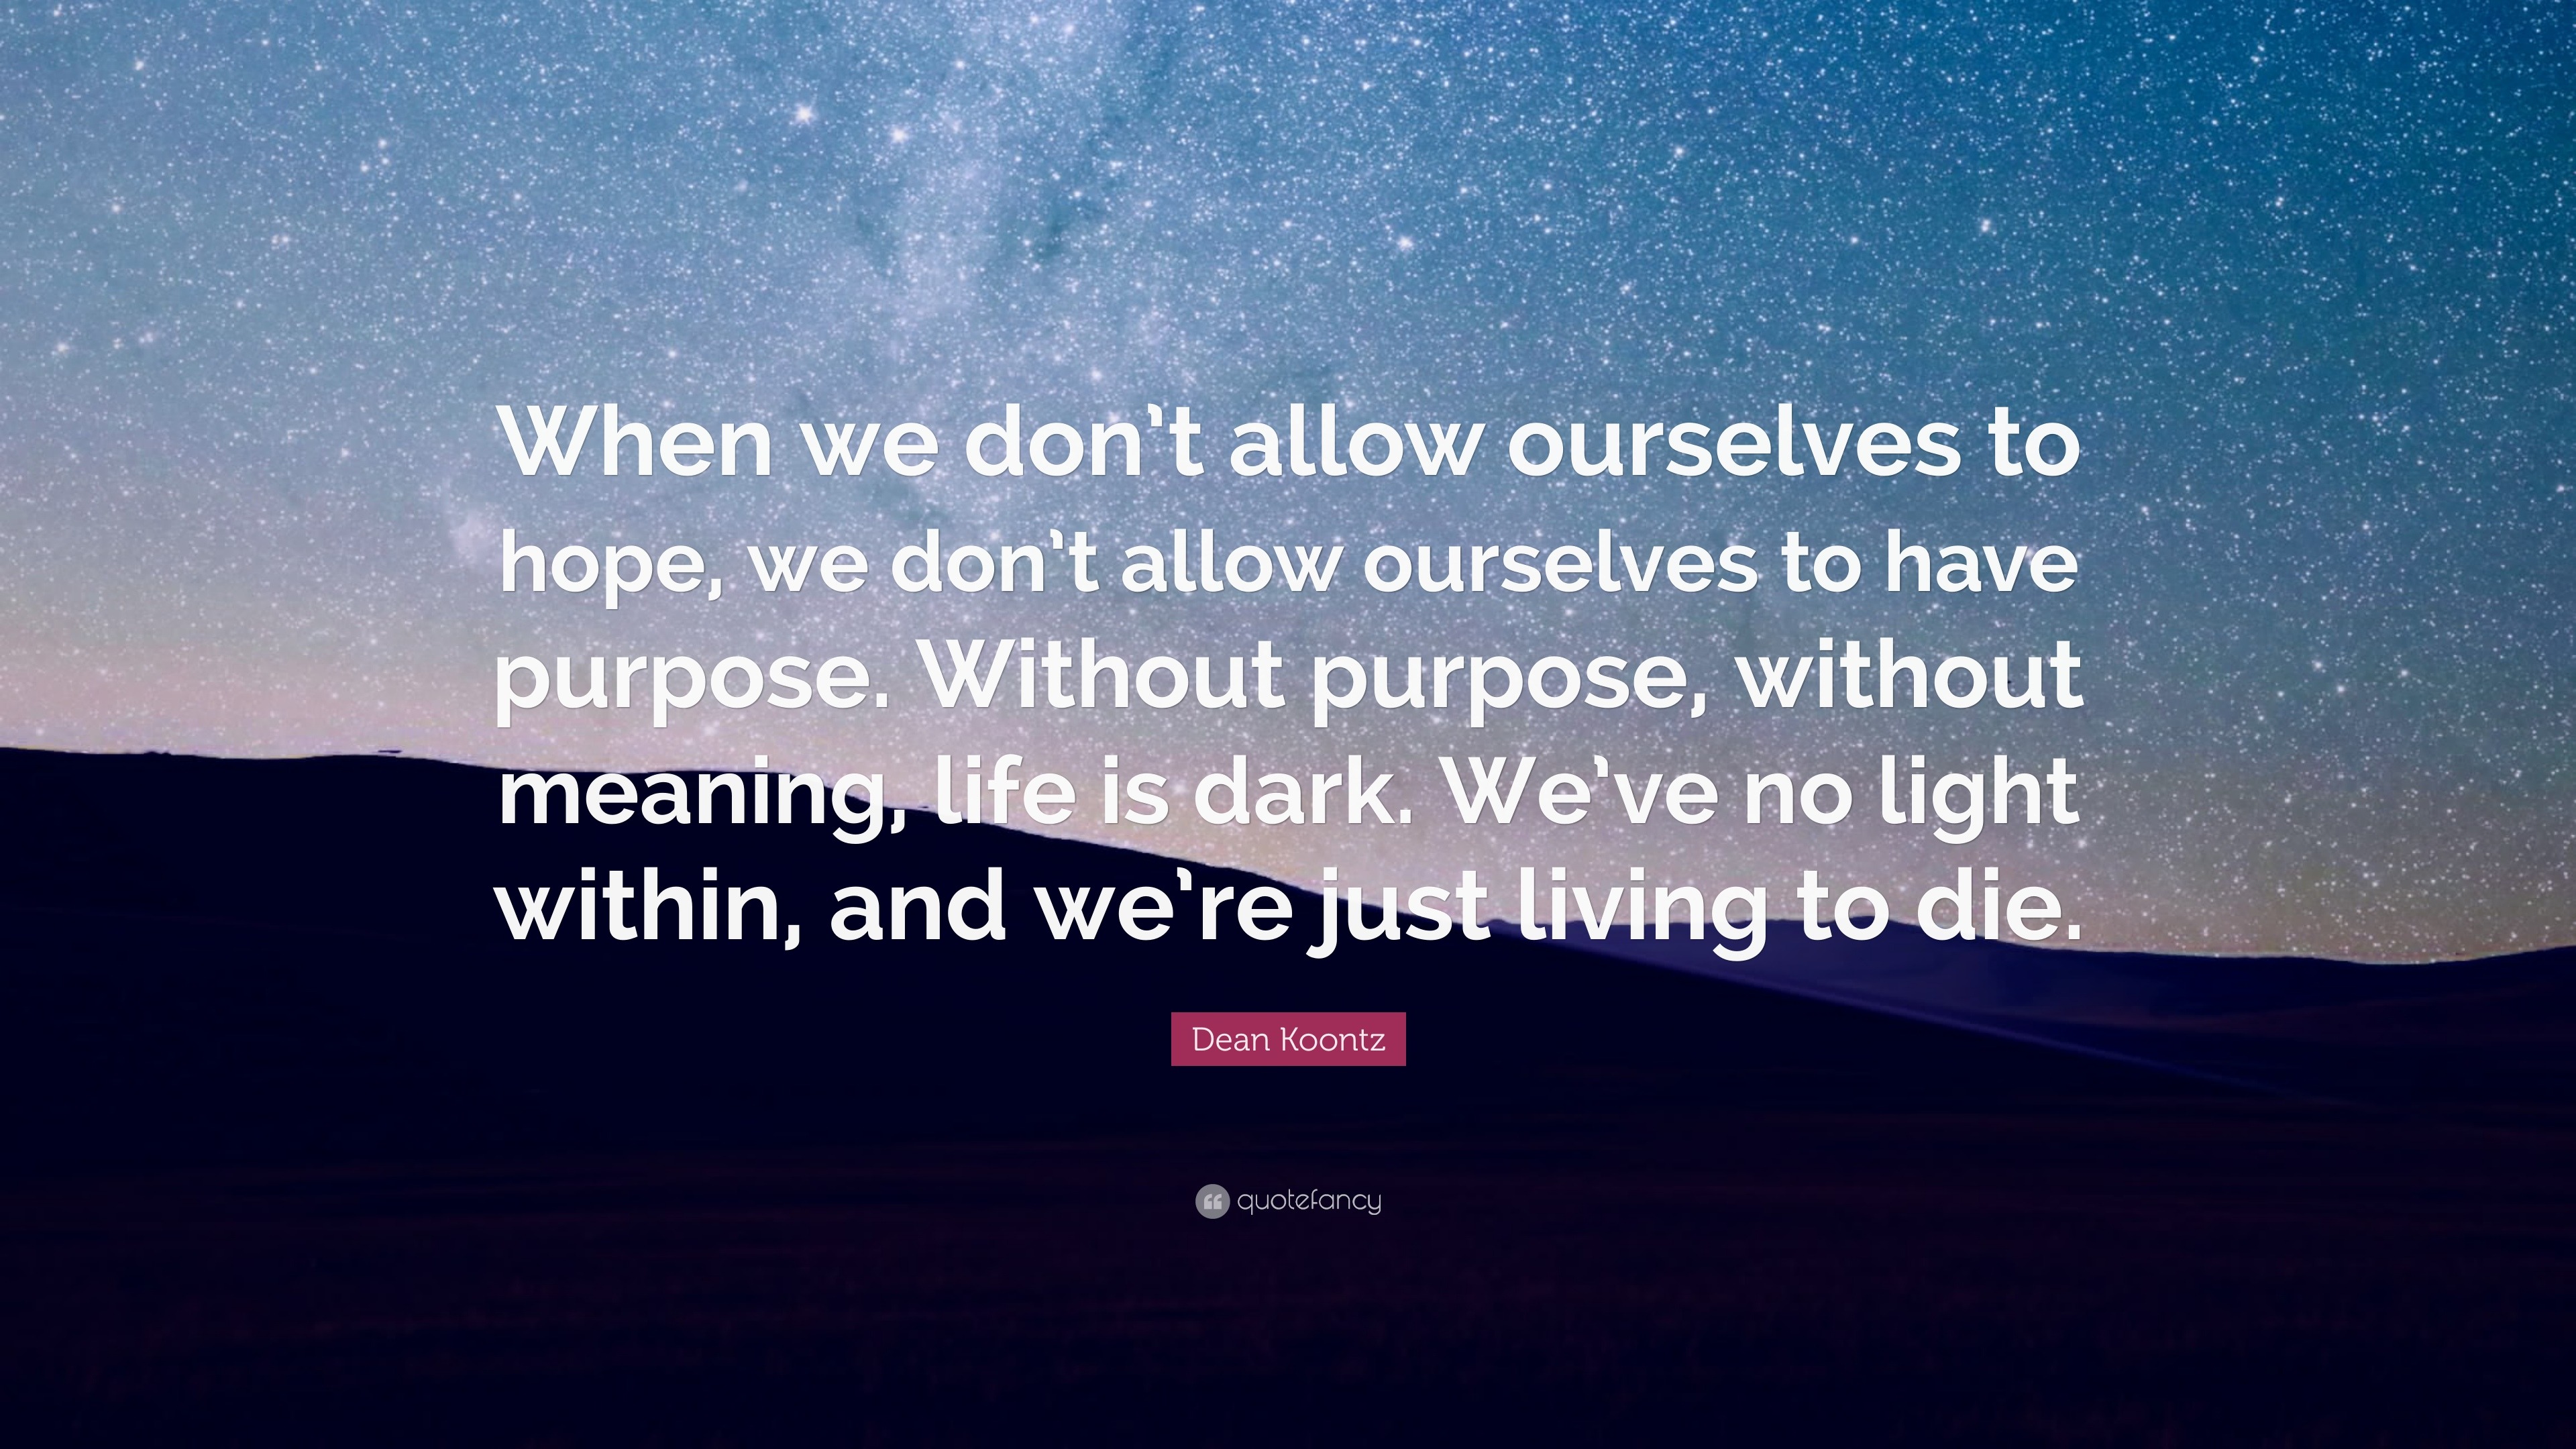 Dean Koontz Quote: “When we don’t allow ourselves to hope, we don’t ...